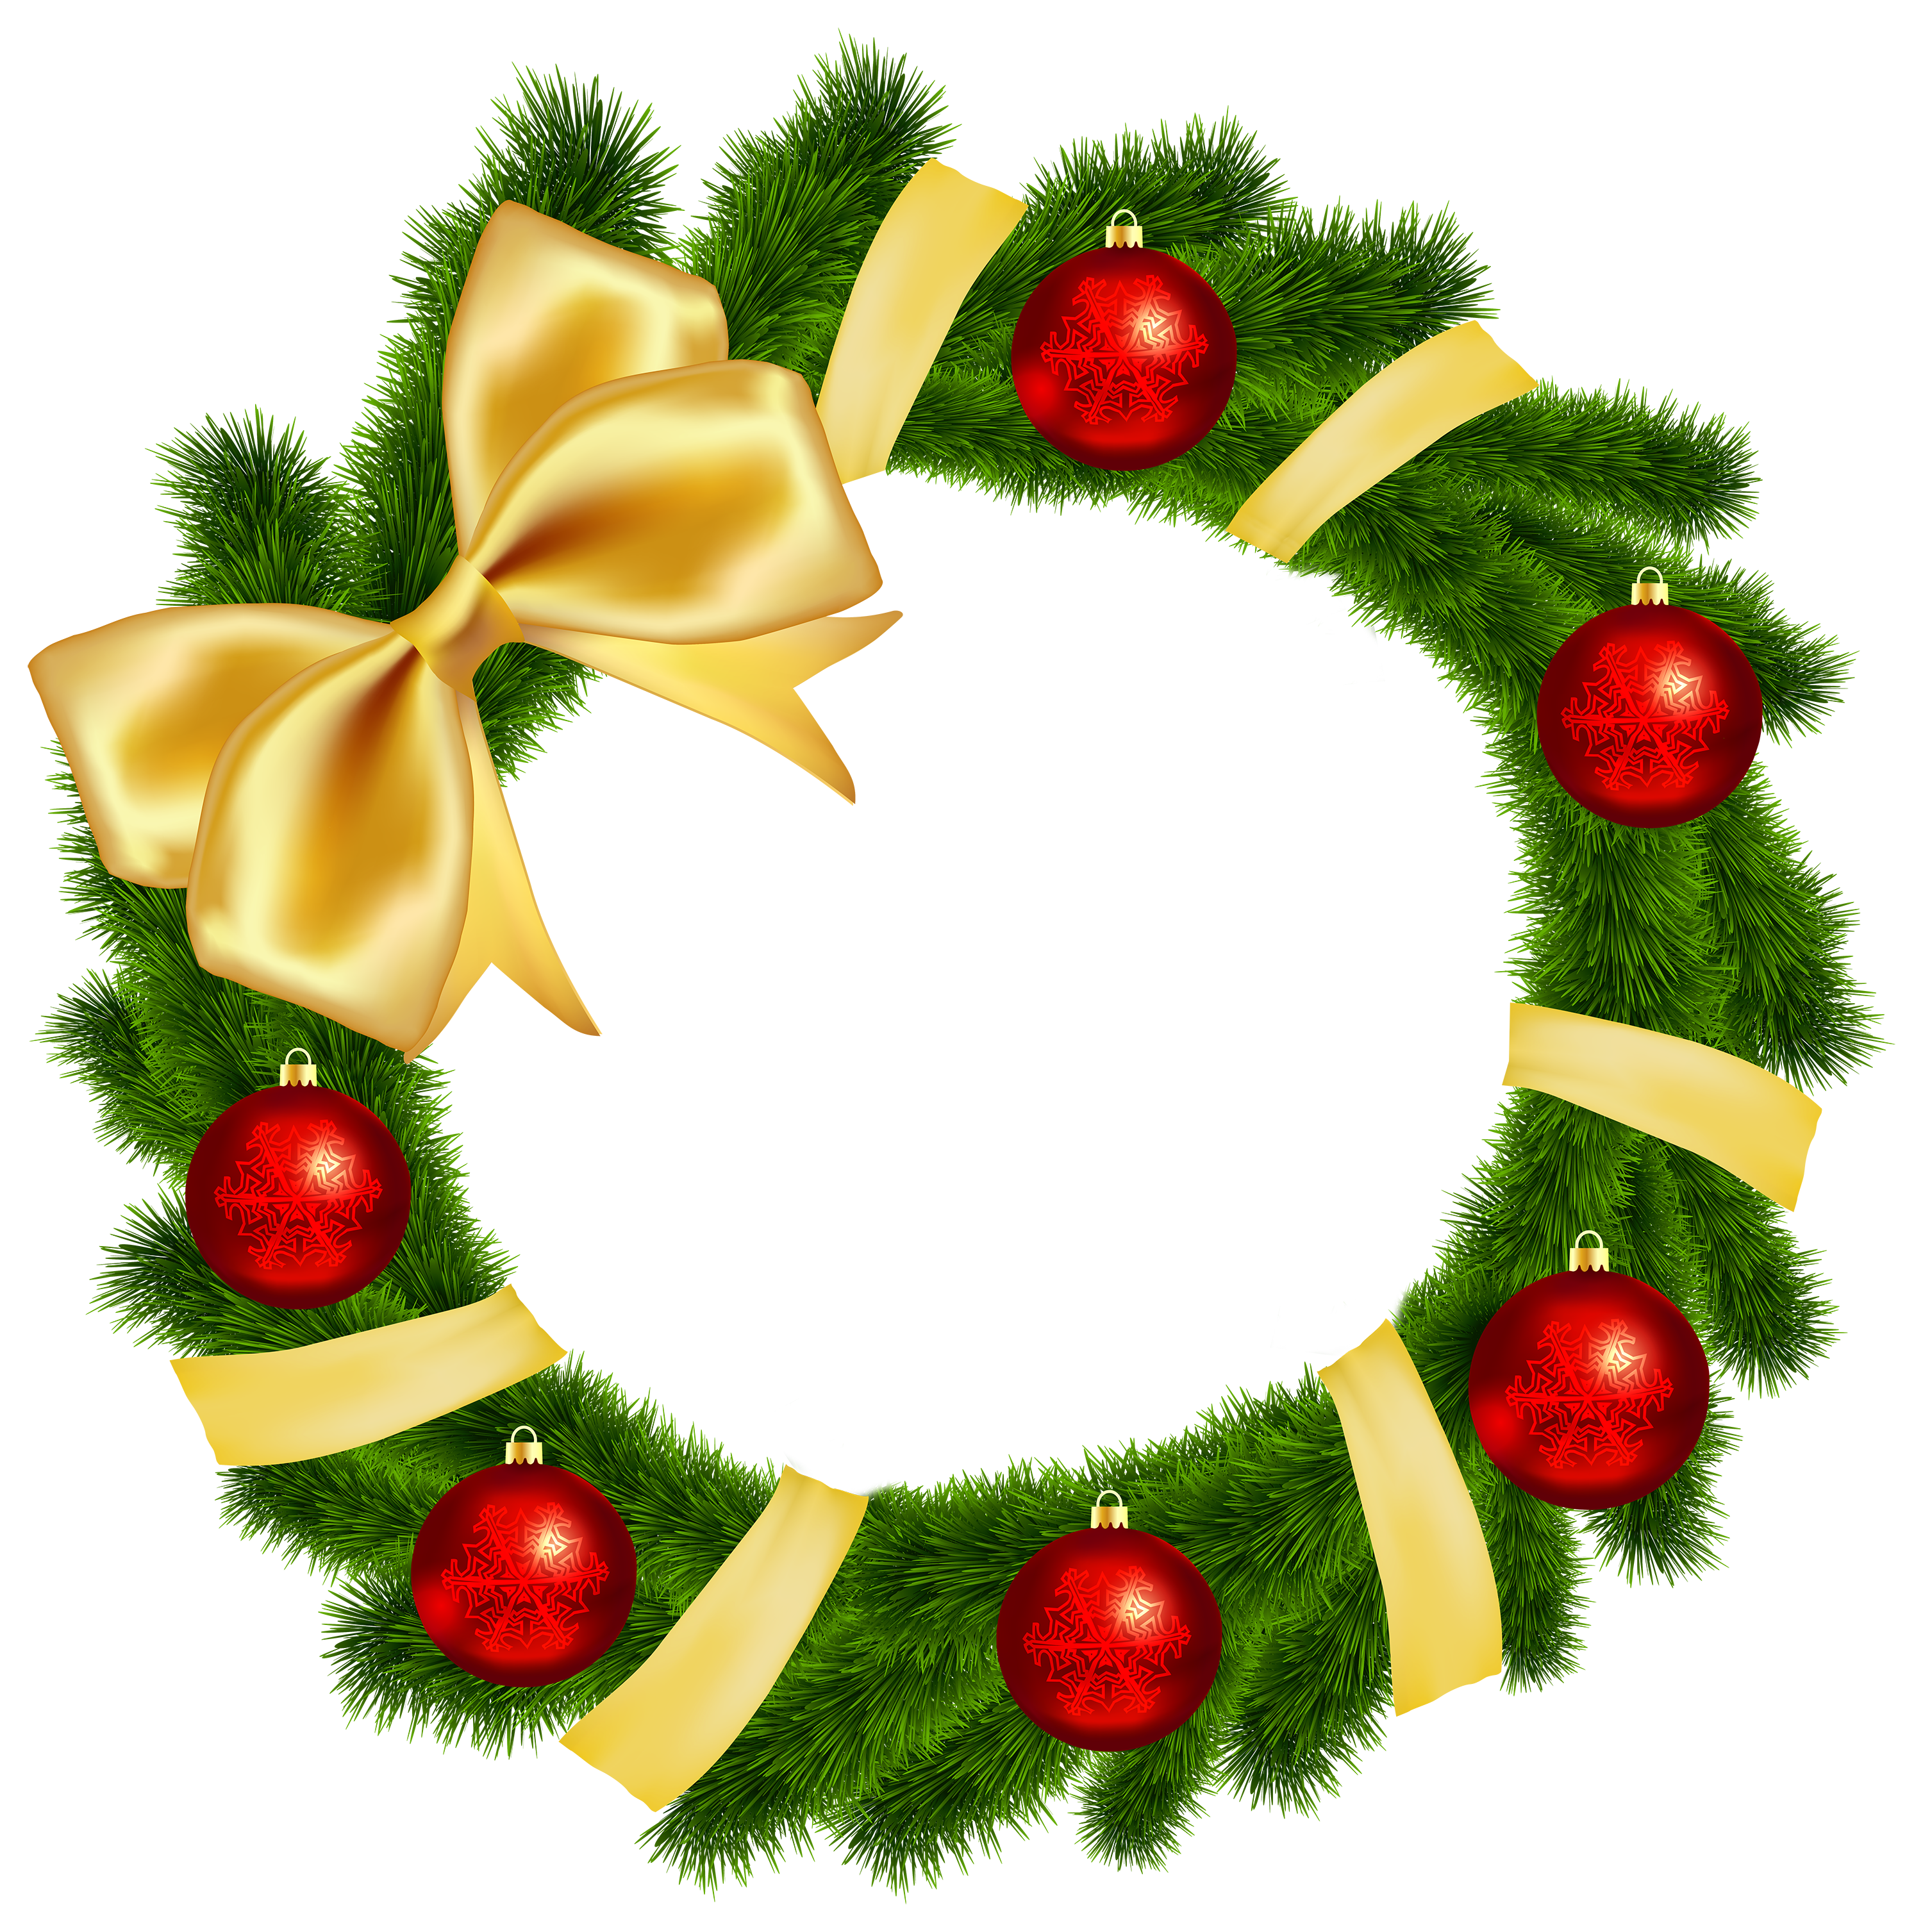 Free Christmas Wreath Cliparts, Download Free Clip Art, Free.